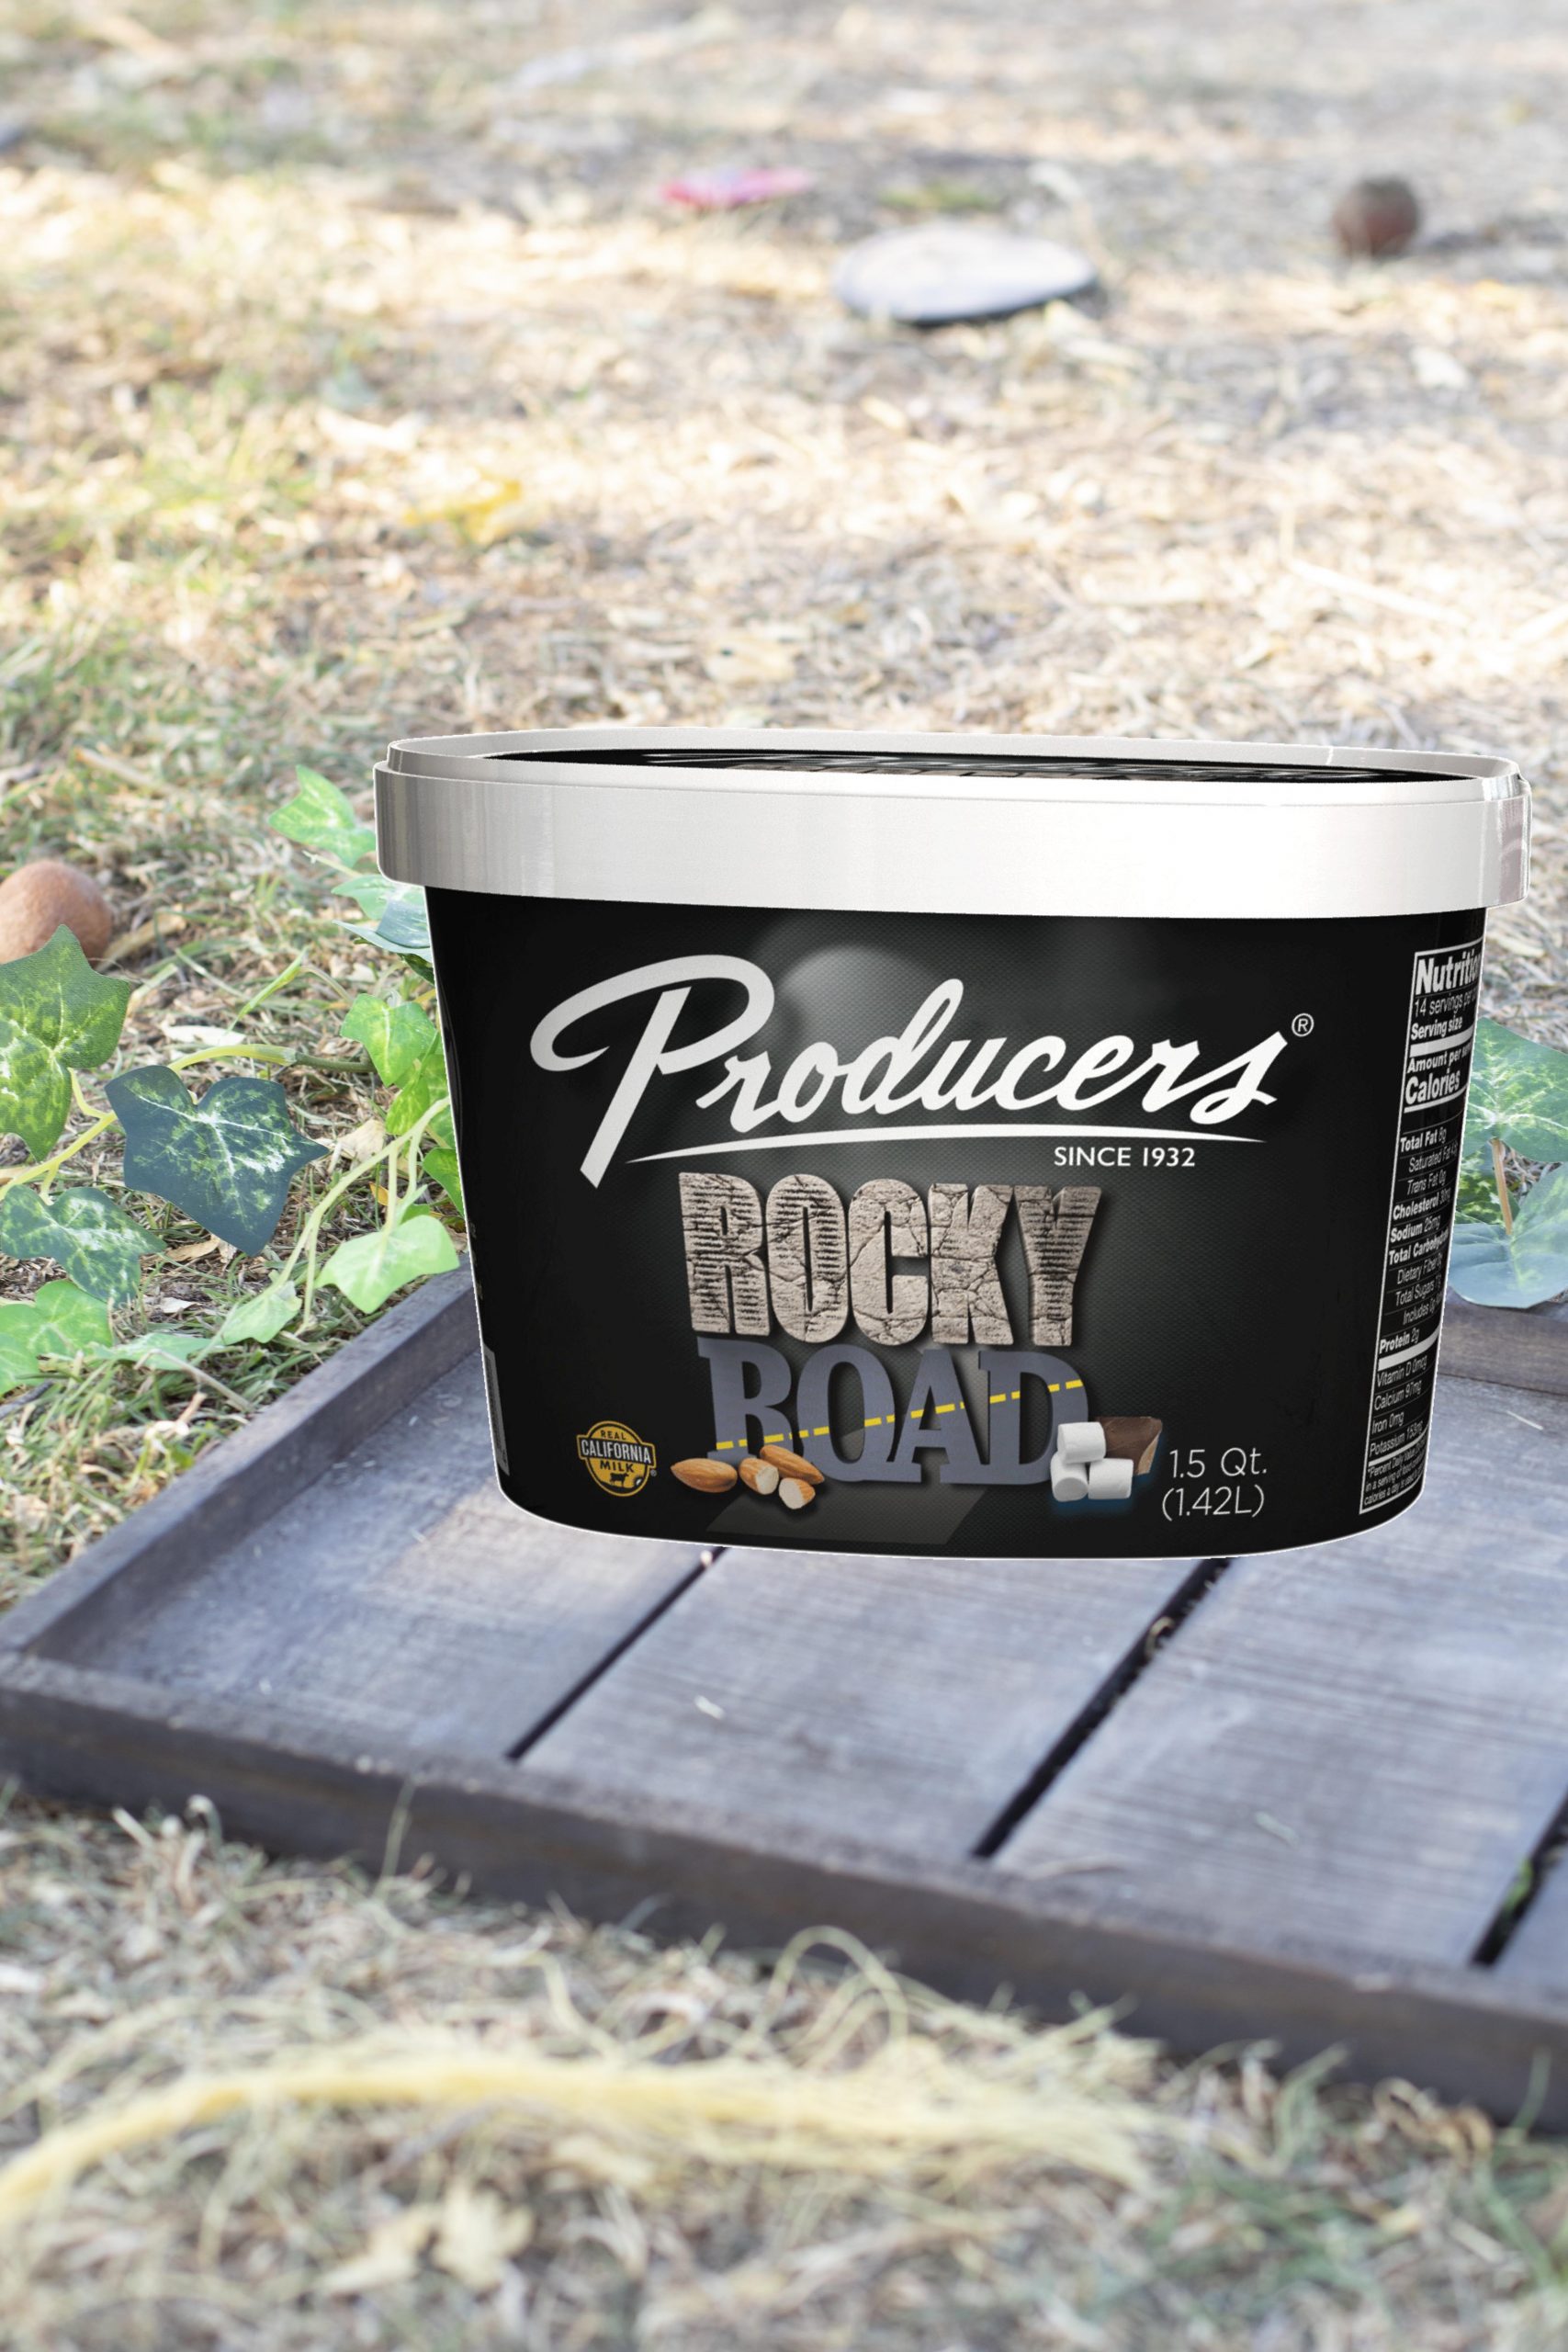 Rocky Road Producers Ice Cream sitting on wood on top of grass.